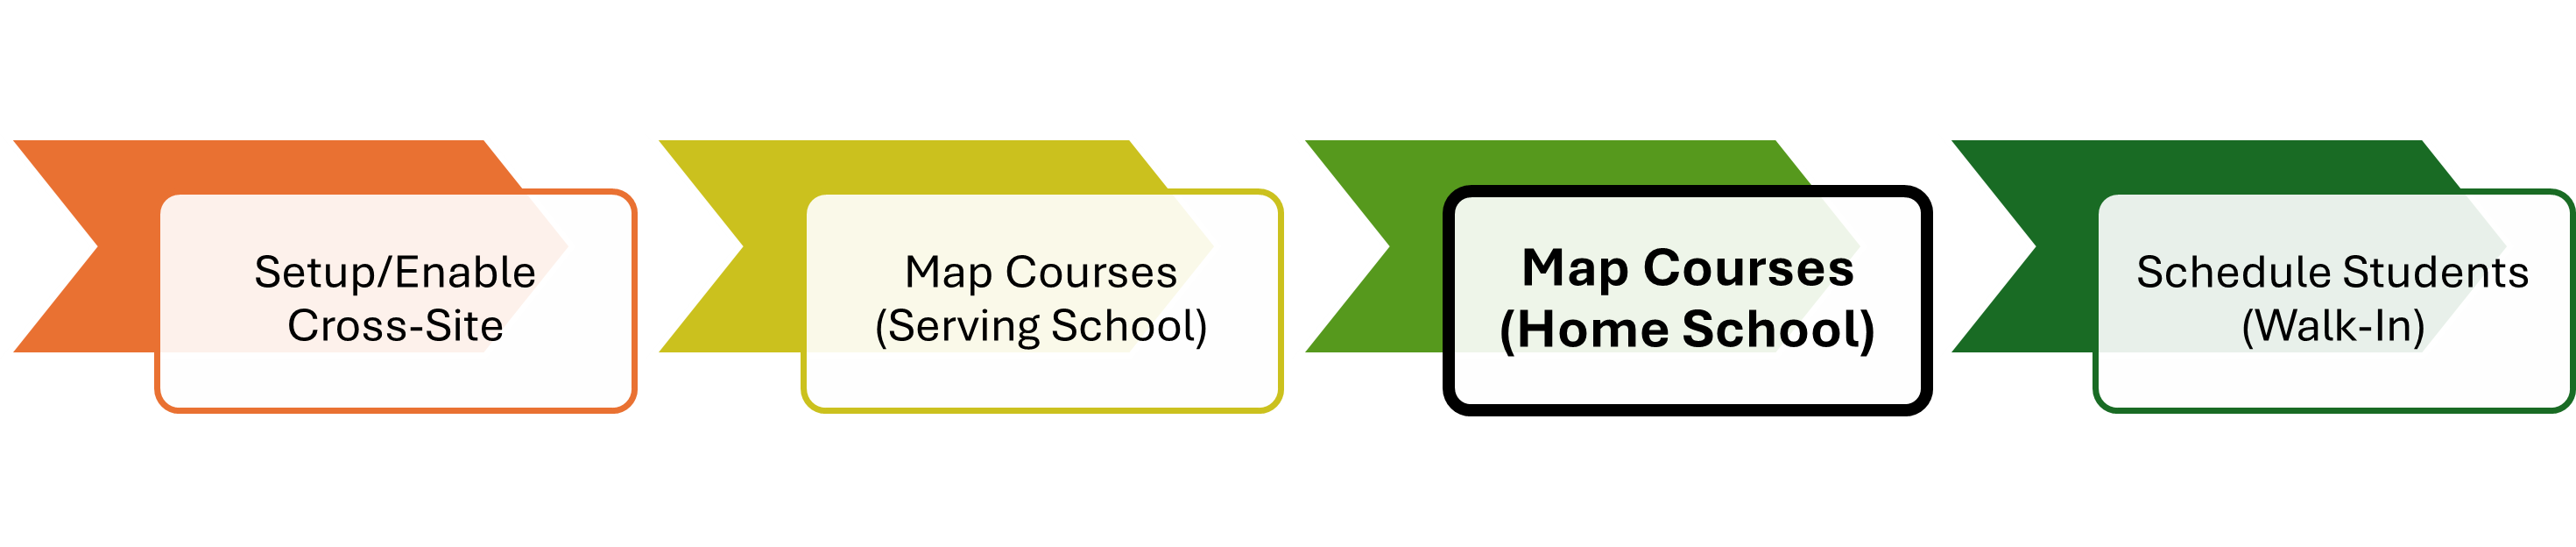 Image of Cross-Site Workflow with Home School Map Courses emphasized.